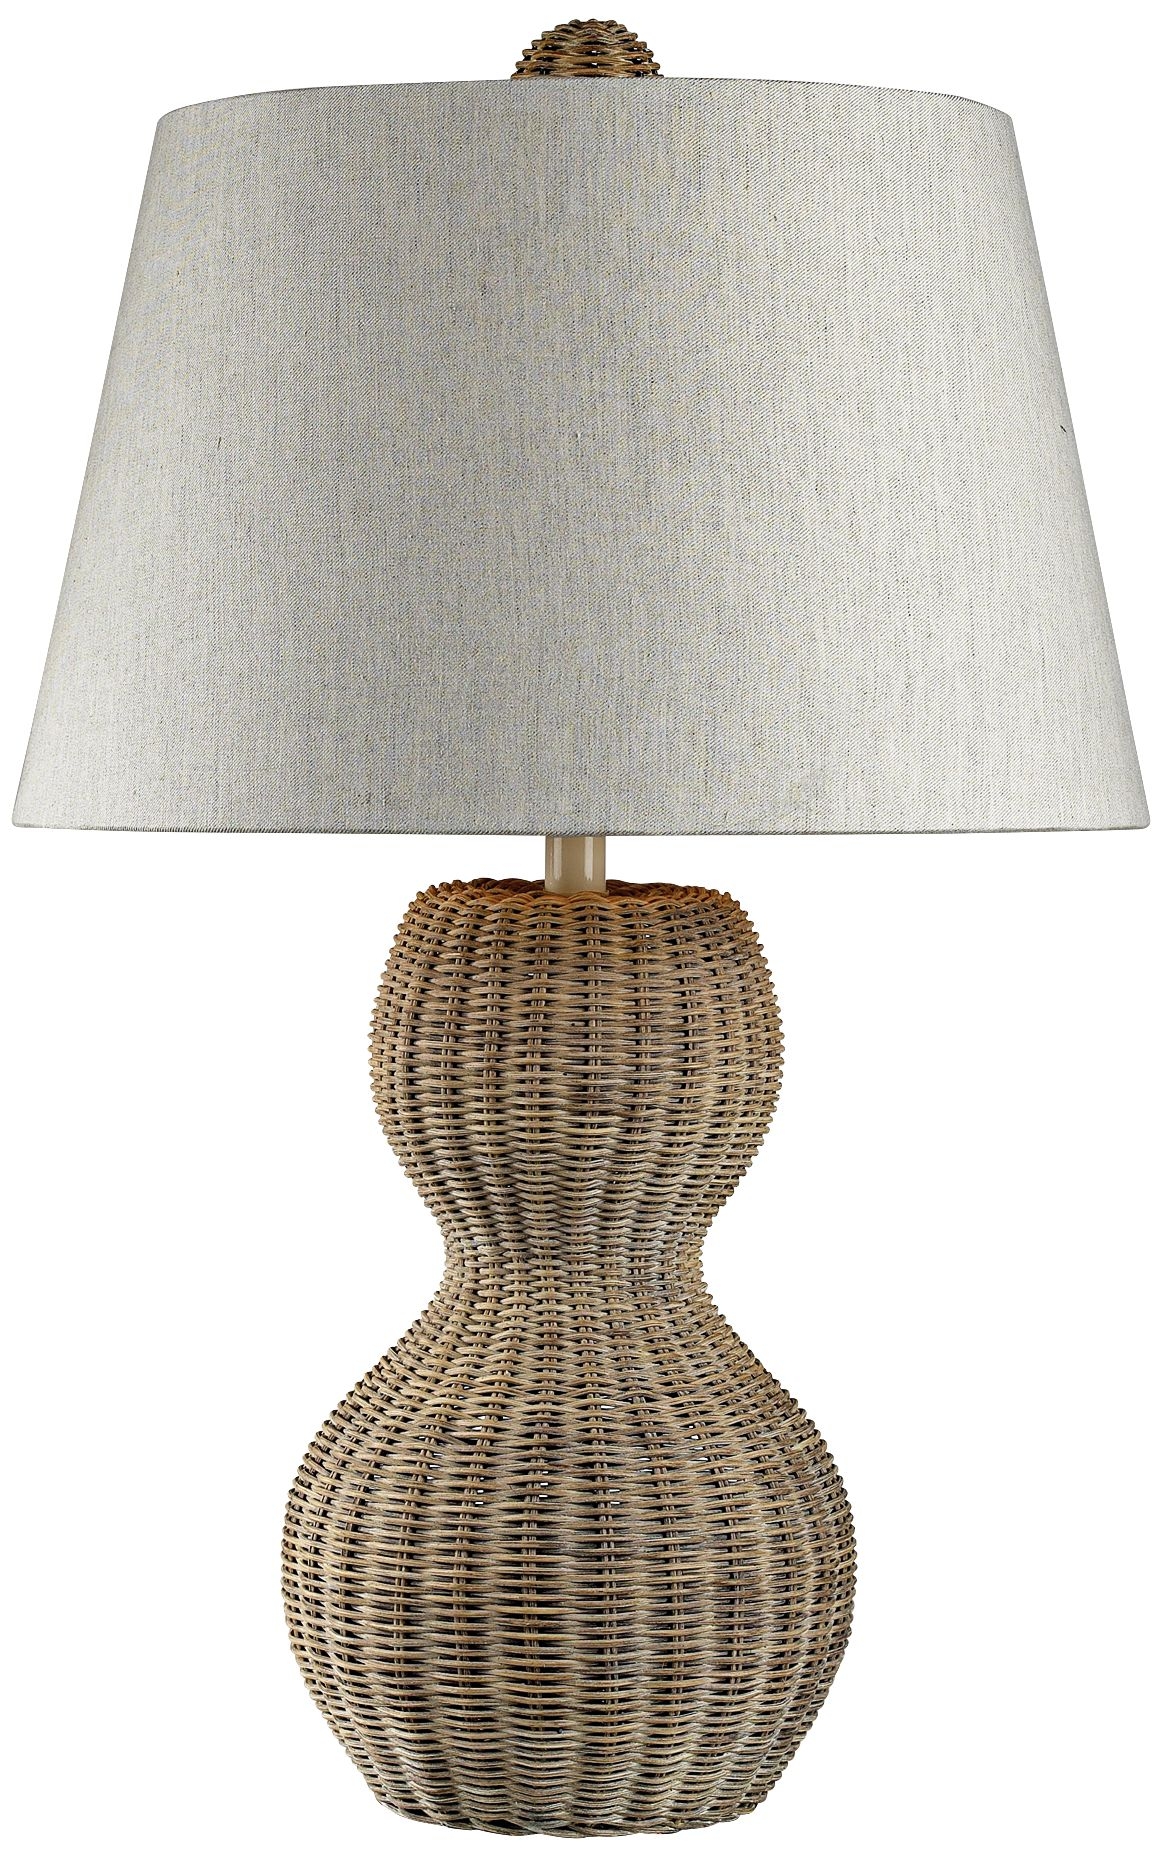 Dimond Sycamore Hill Rattan Table Lamp - Image 0